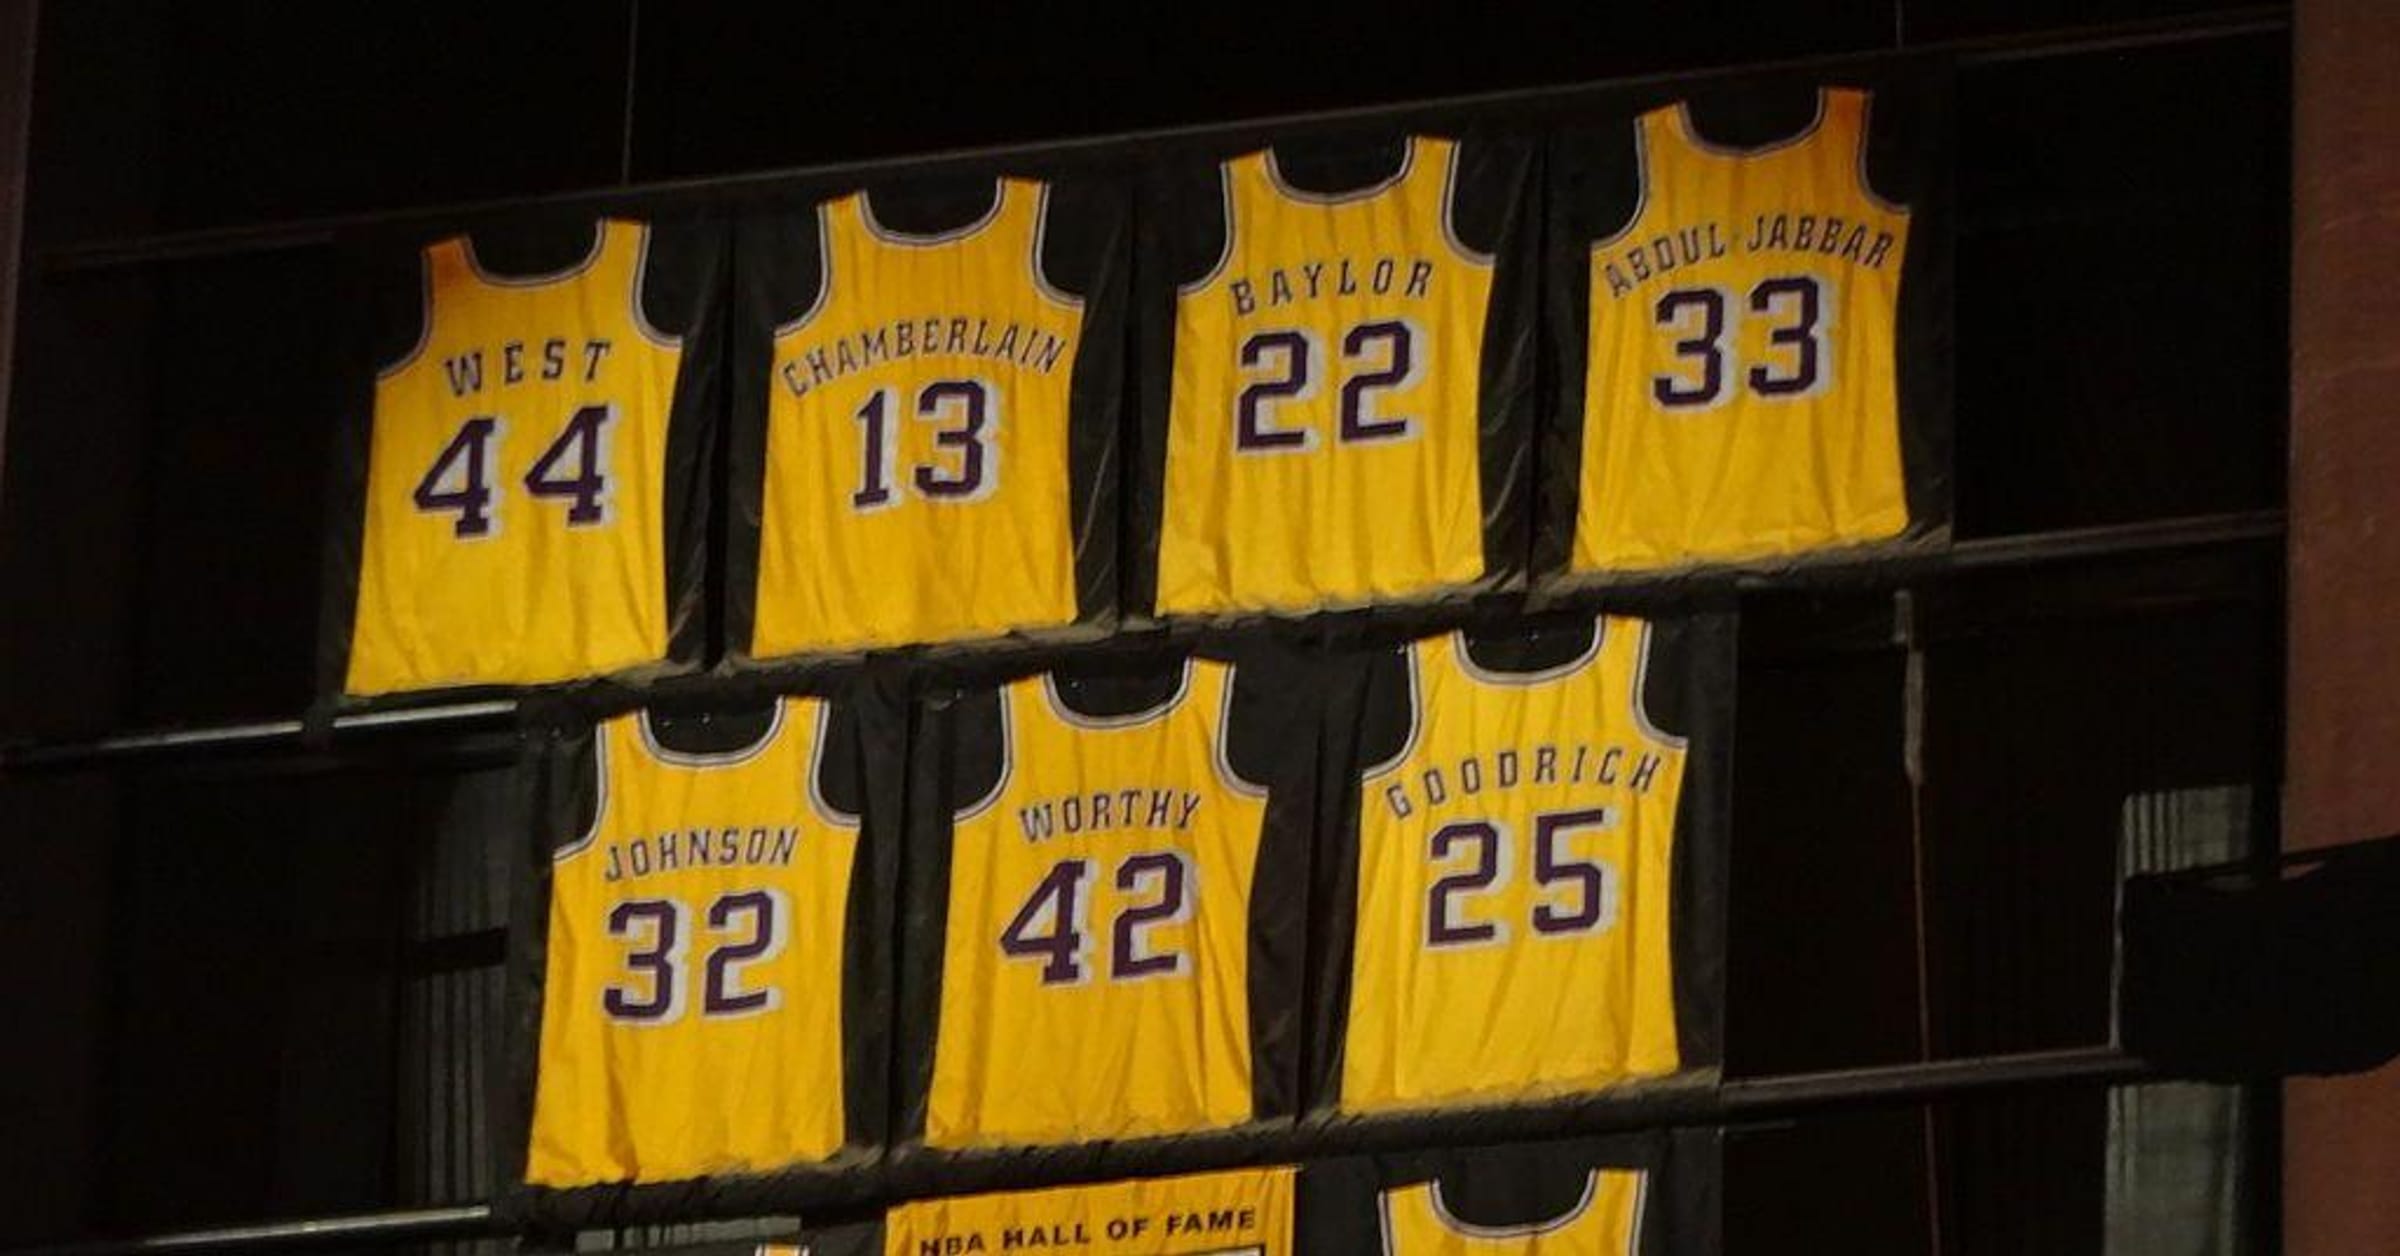 A shot of all the retired jerseys in the Los Angeles Lakers